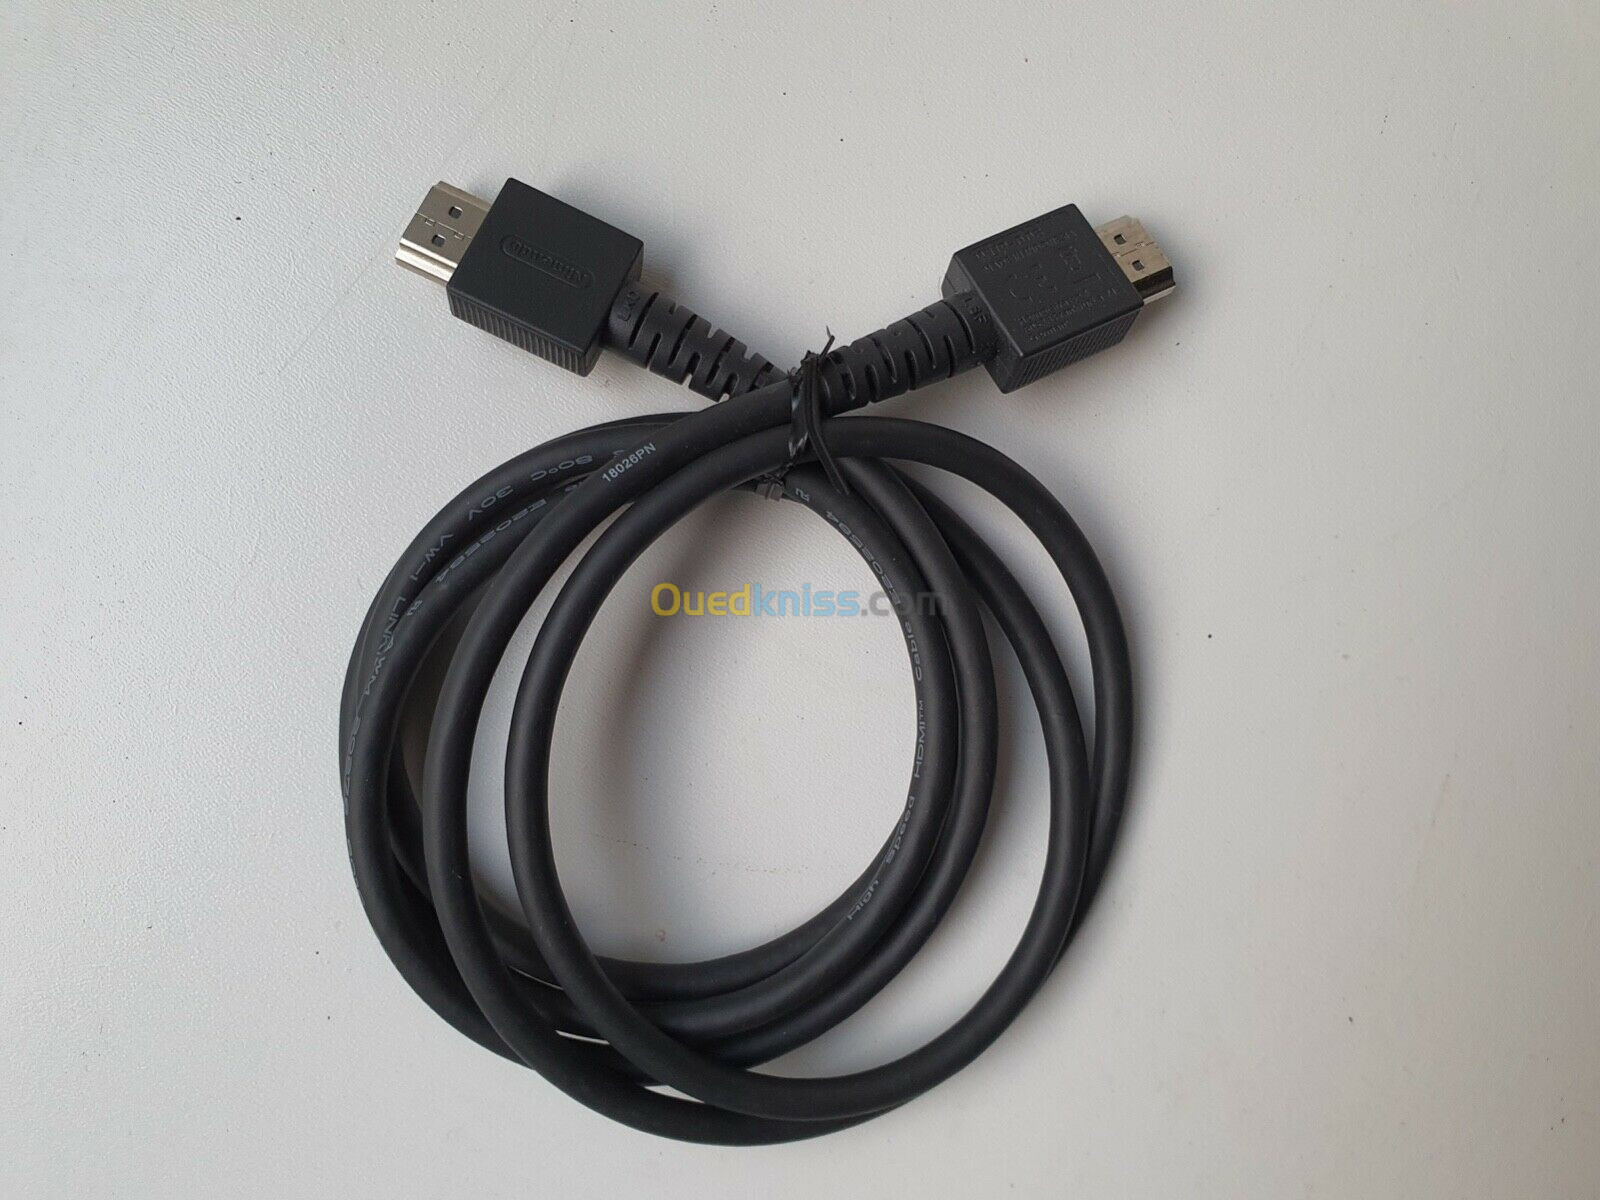 Nintendo Switch HDMI Cable 